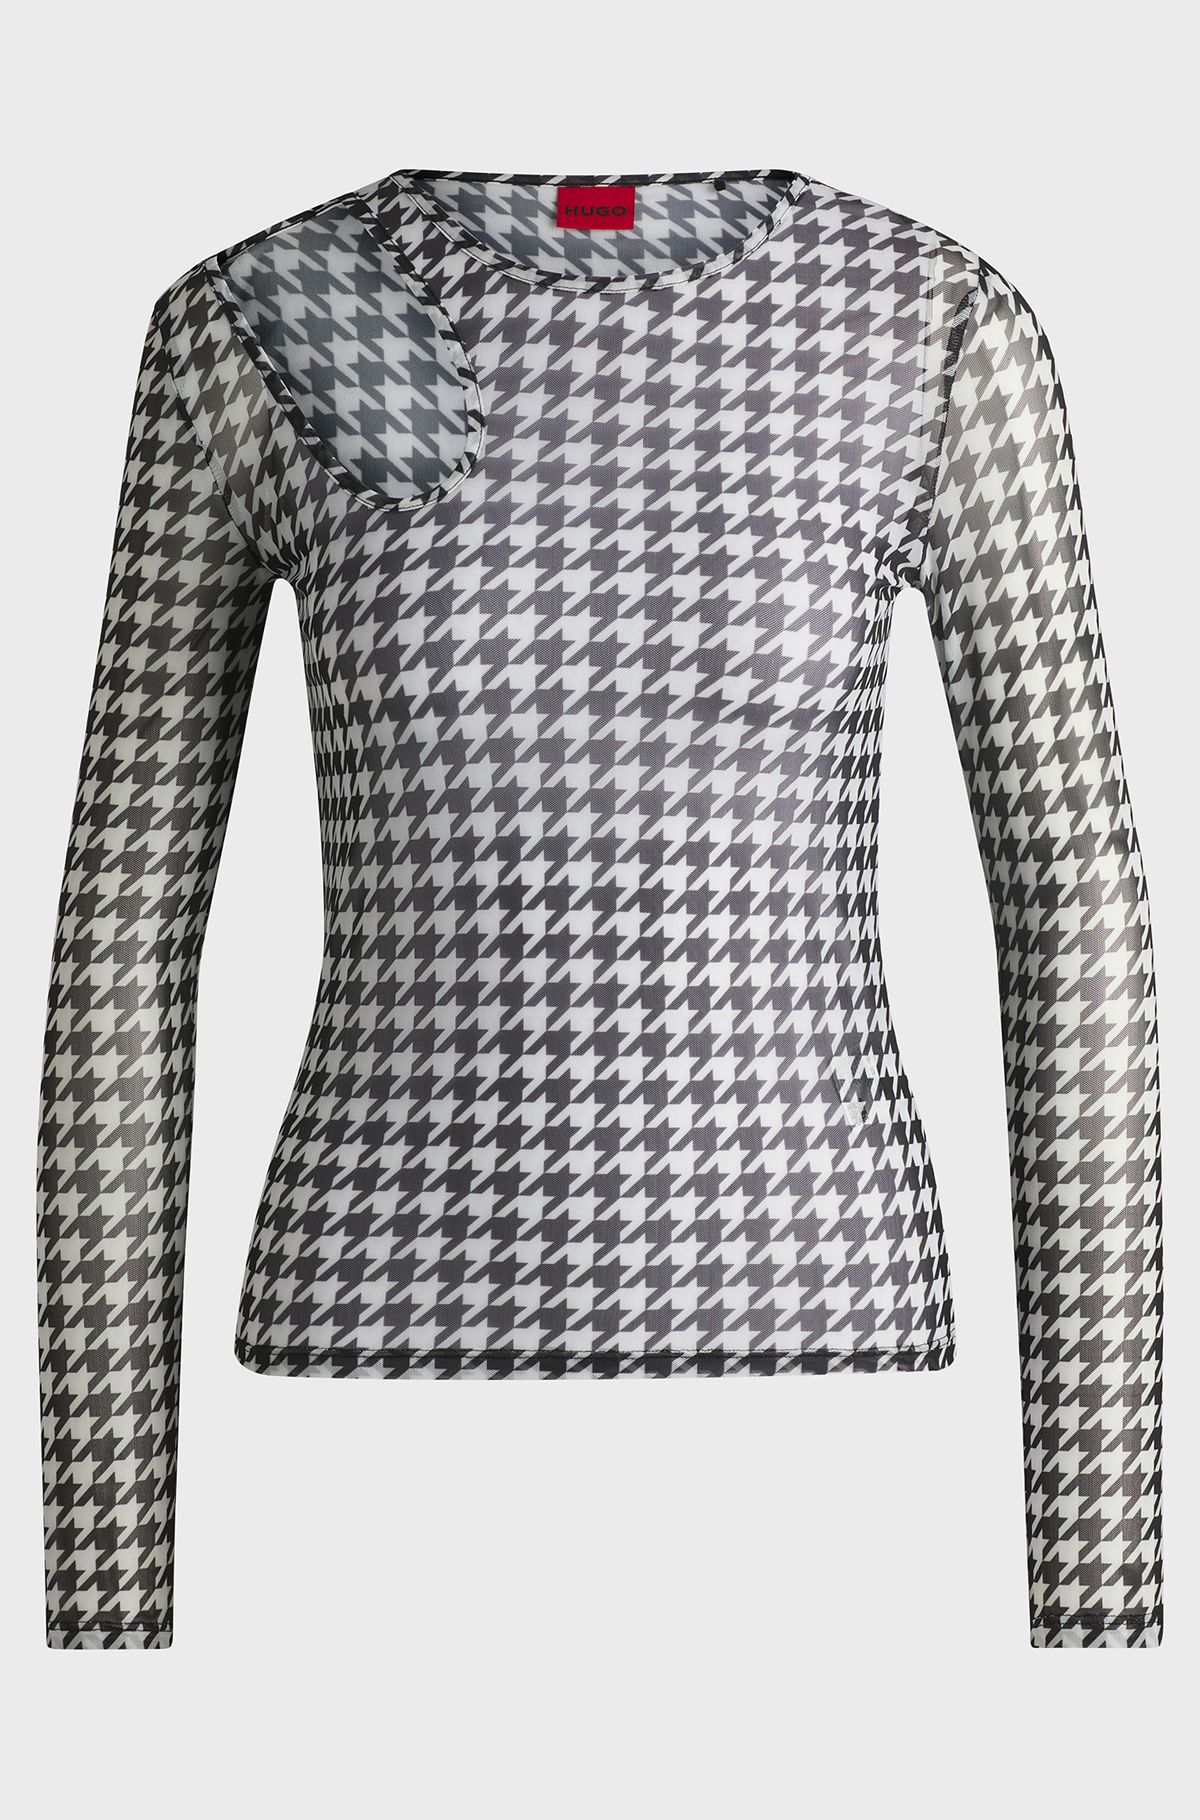 Printed-mesh top with cut-out neckline, Patterned